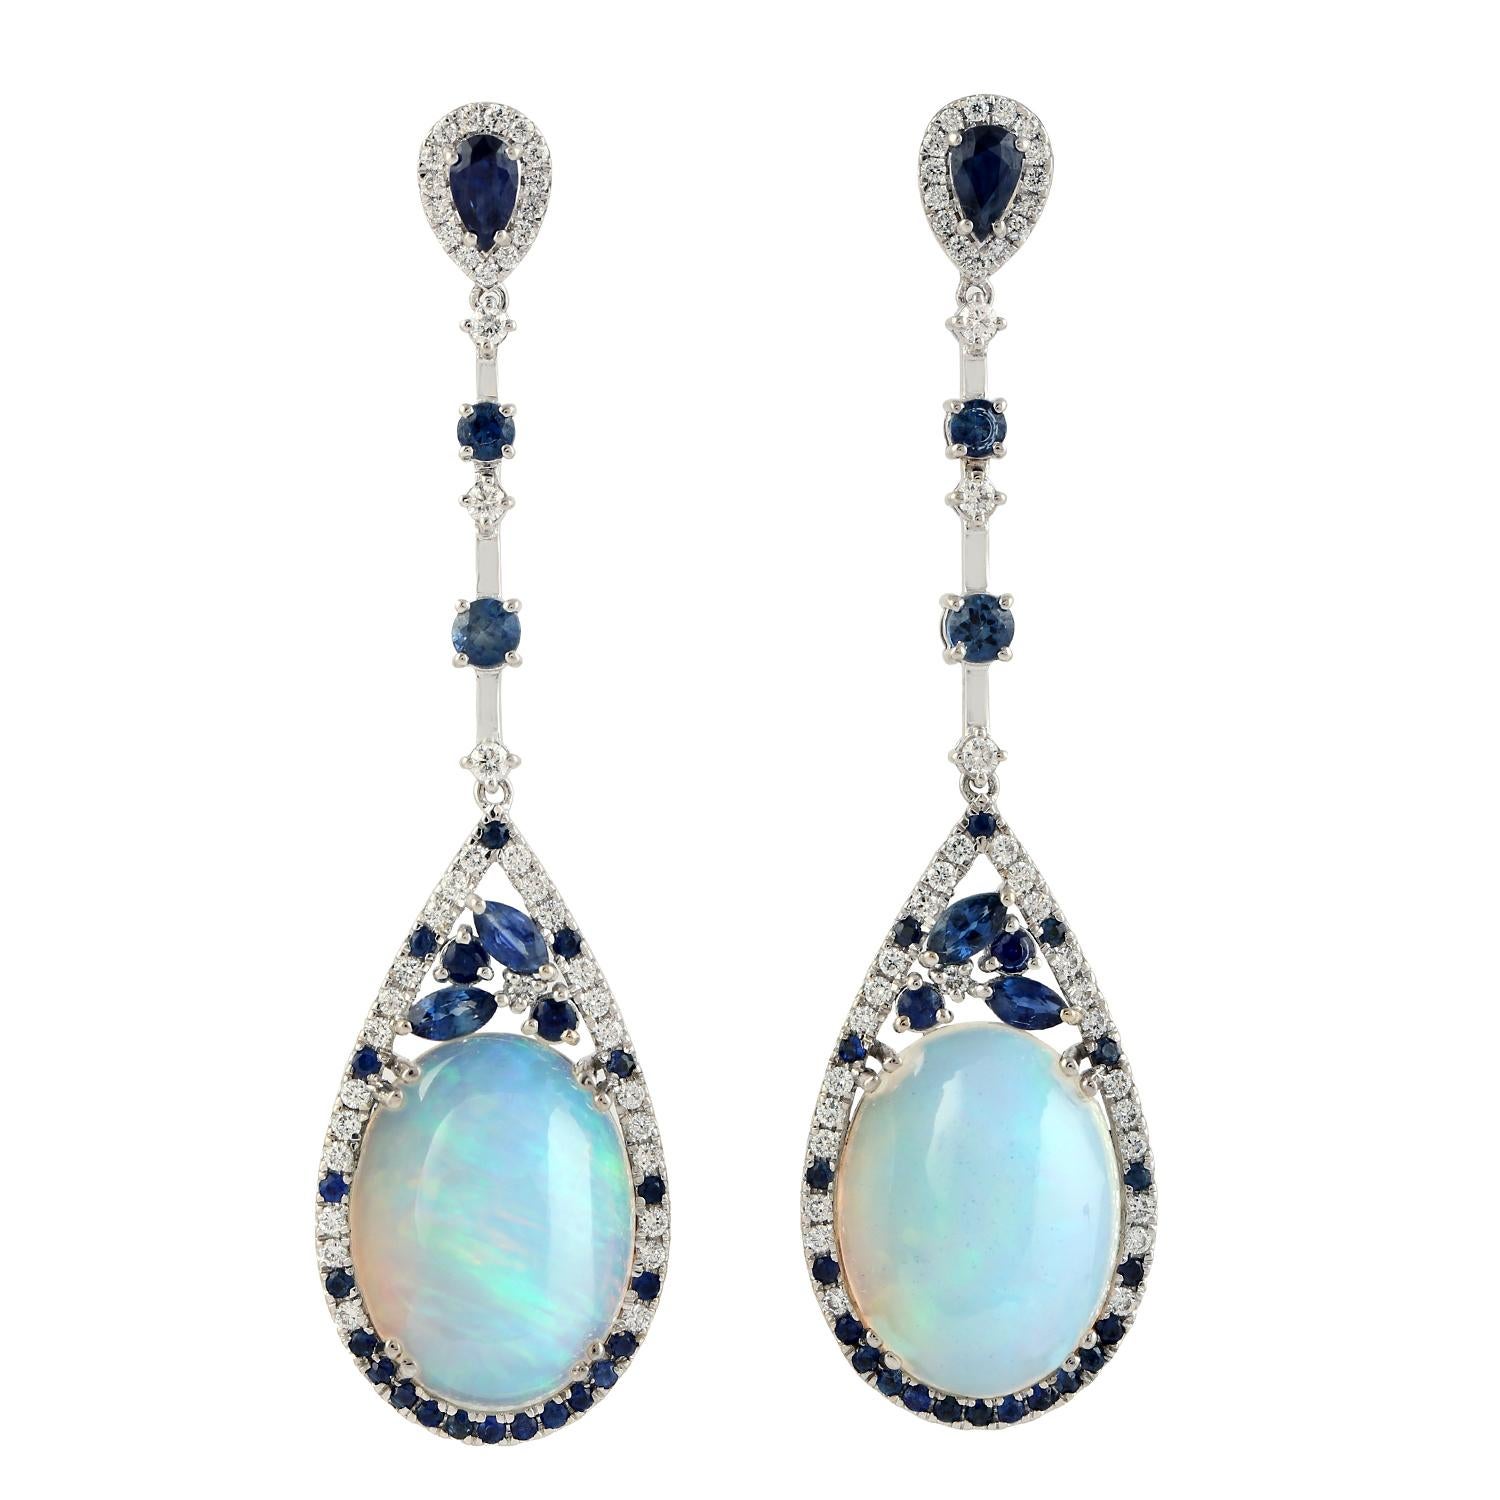 Cast in 14 karat gold. These earrings are hand set in 10.61 carats Ethiopian opal, 2.17 carats blue sapphire and .69 carats of sparkling diamonds.

FOLLOW  MEGHNA JEWELS storefront to view the latest collection & exclusive pieces.  Meghna Jewels is